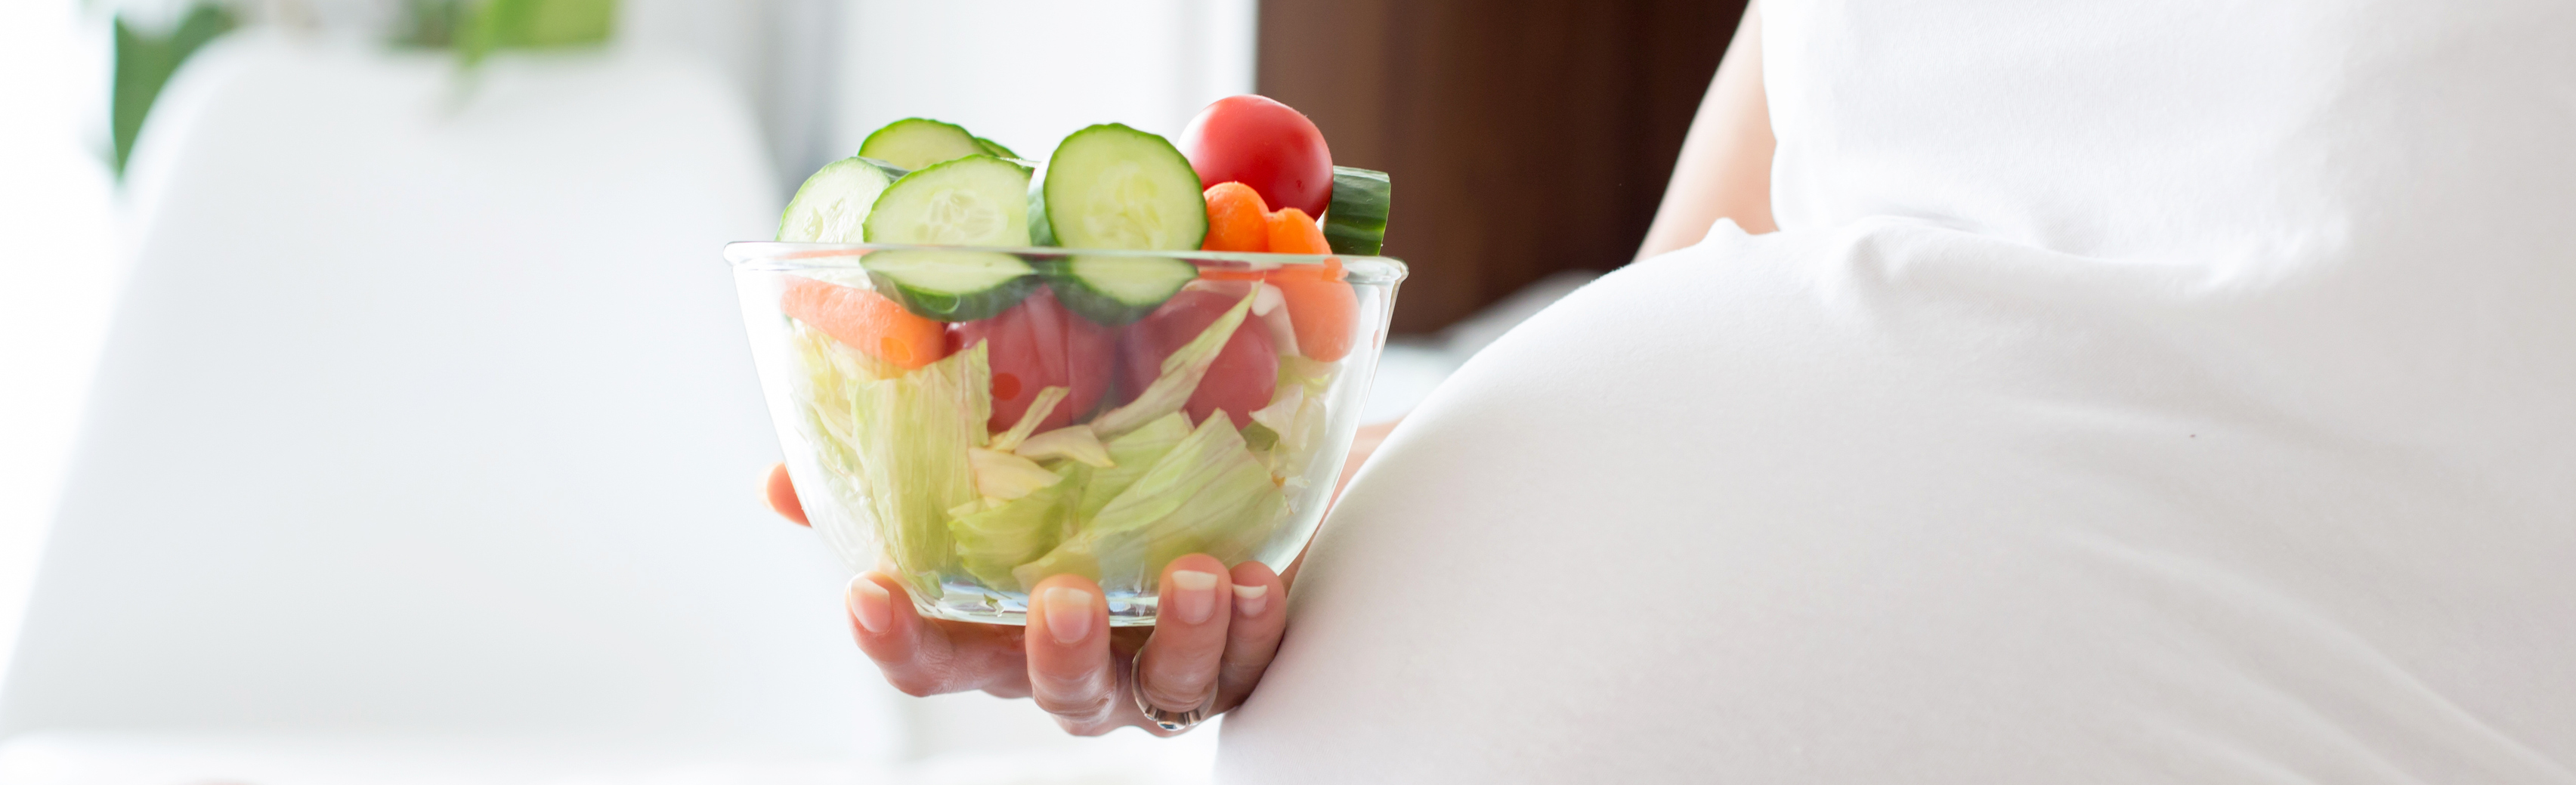 Pregnant woman in white shirt holding bowl of vegetables